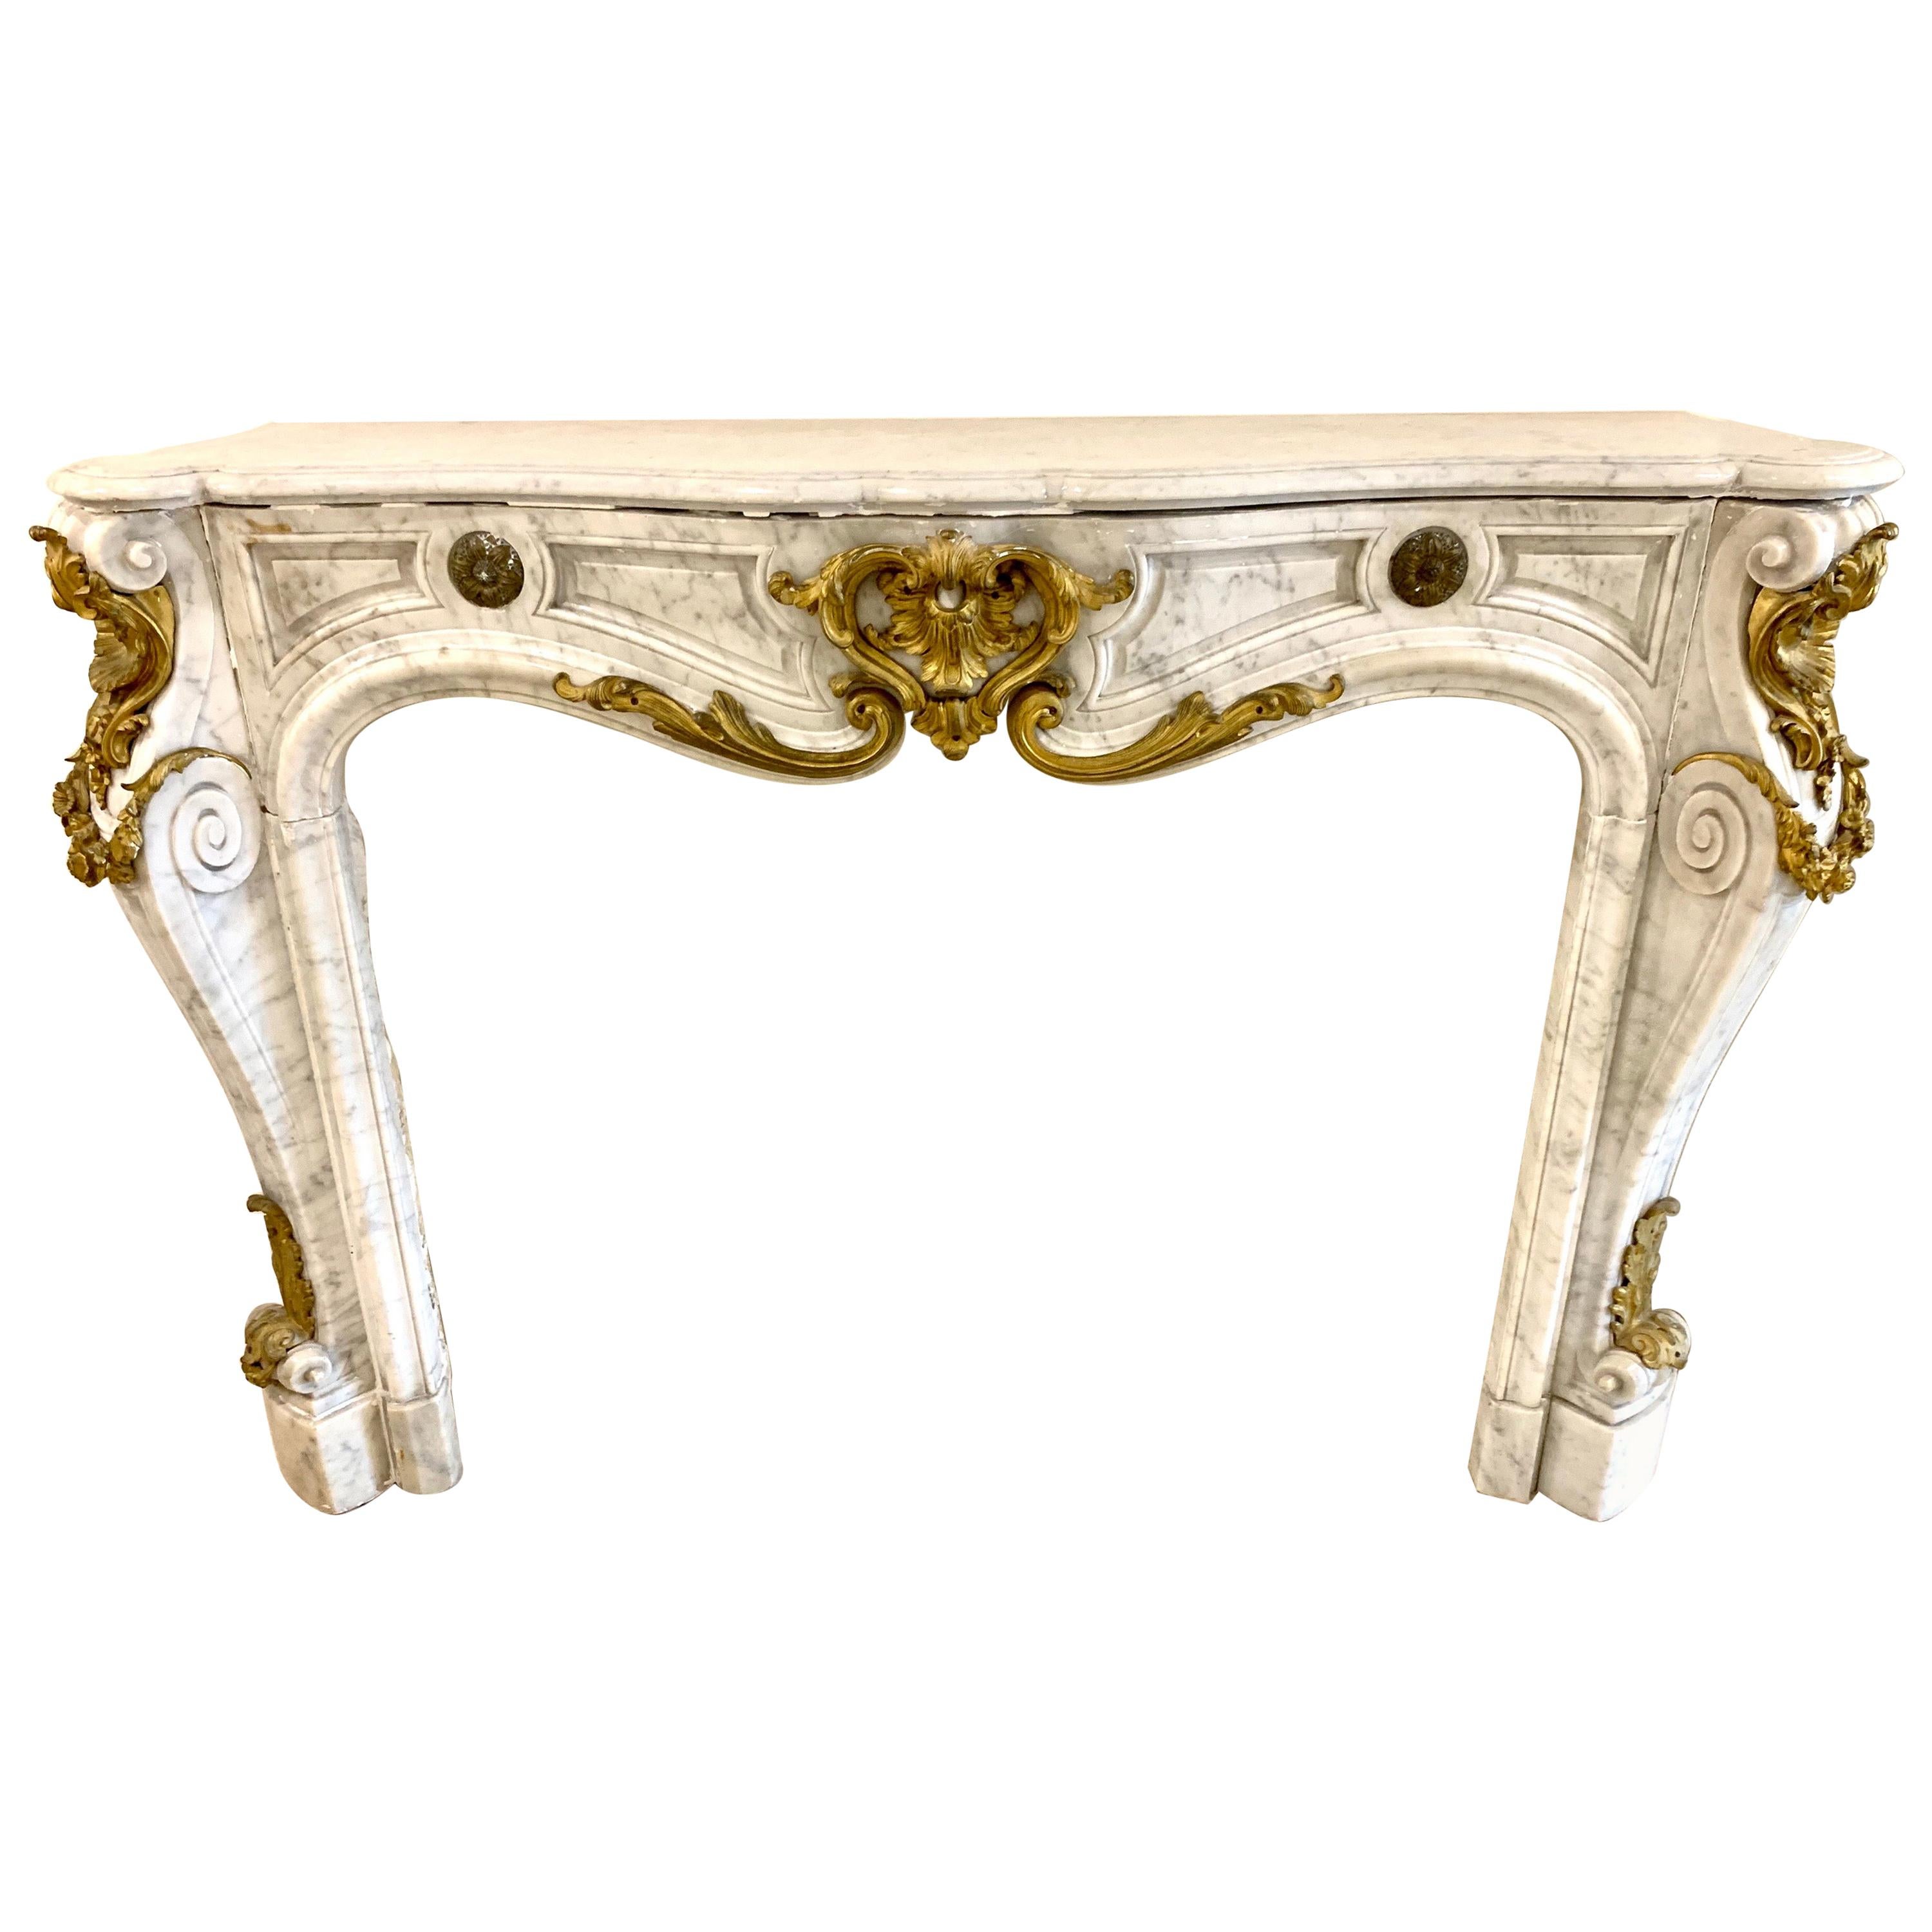 19th Century French Louis XV Style Carrara Marble and Gilt Bronze Mantel